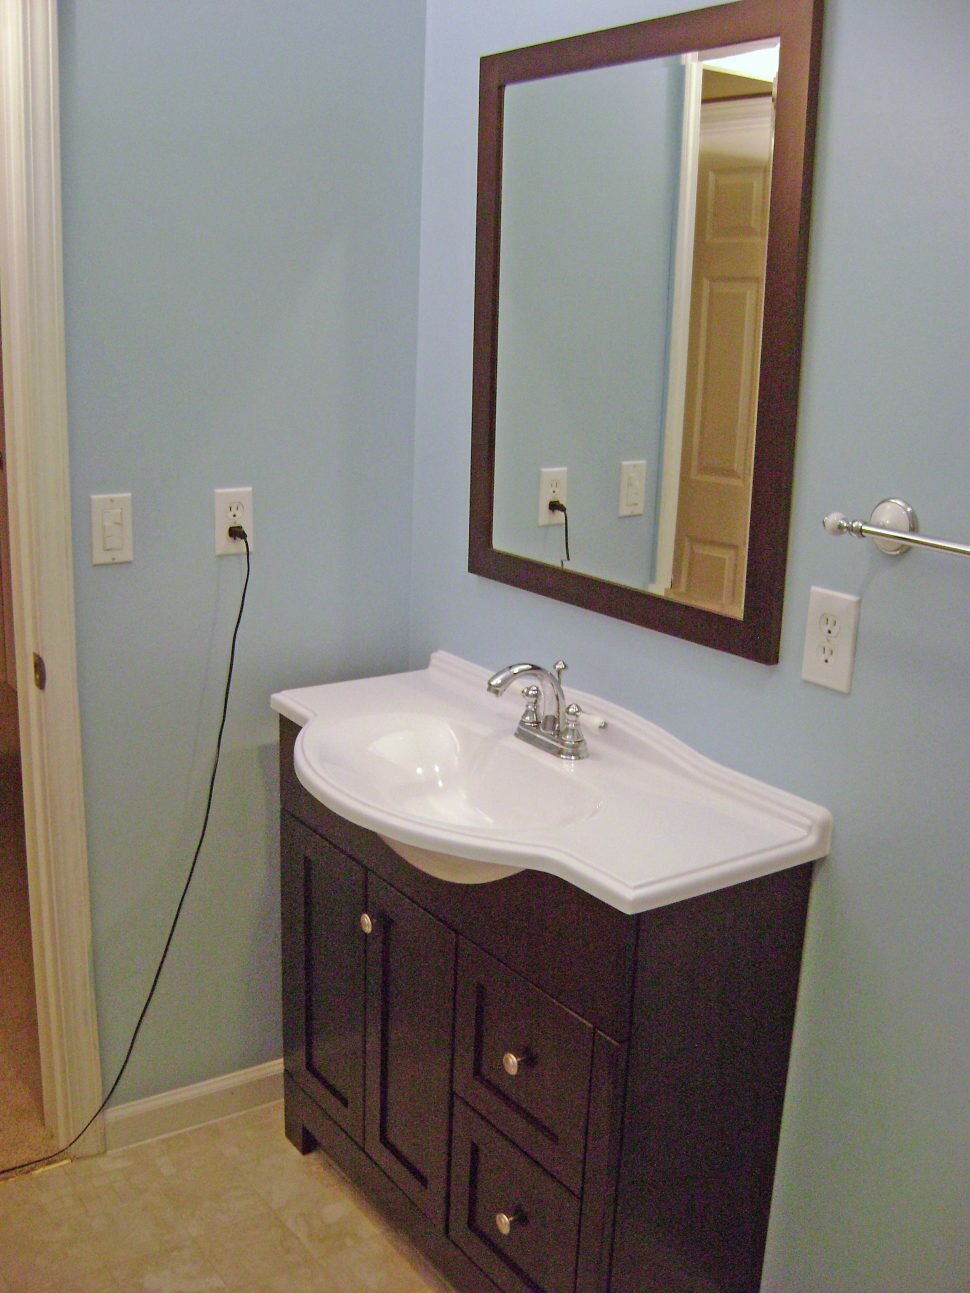 Bathroom Vanity Cabinets Home Depot | Small Bathroom Vanities Home Depot | Vanity Home Depot